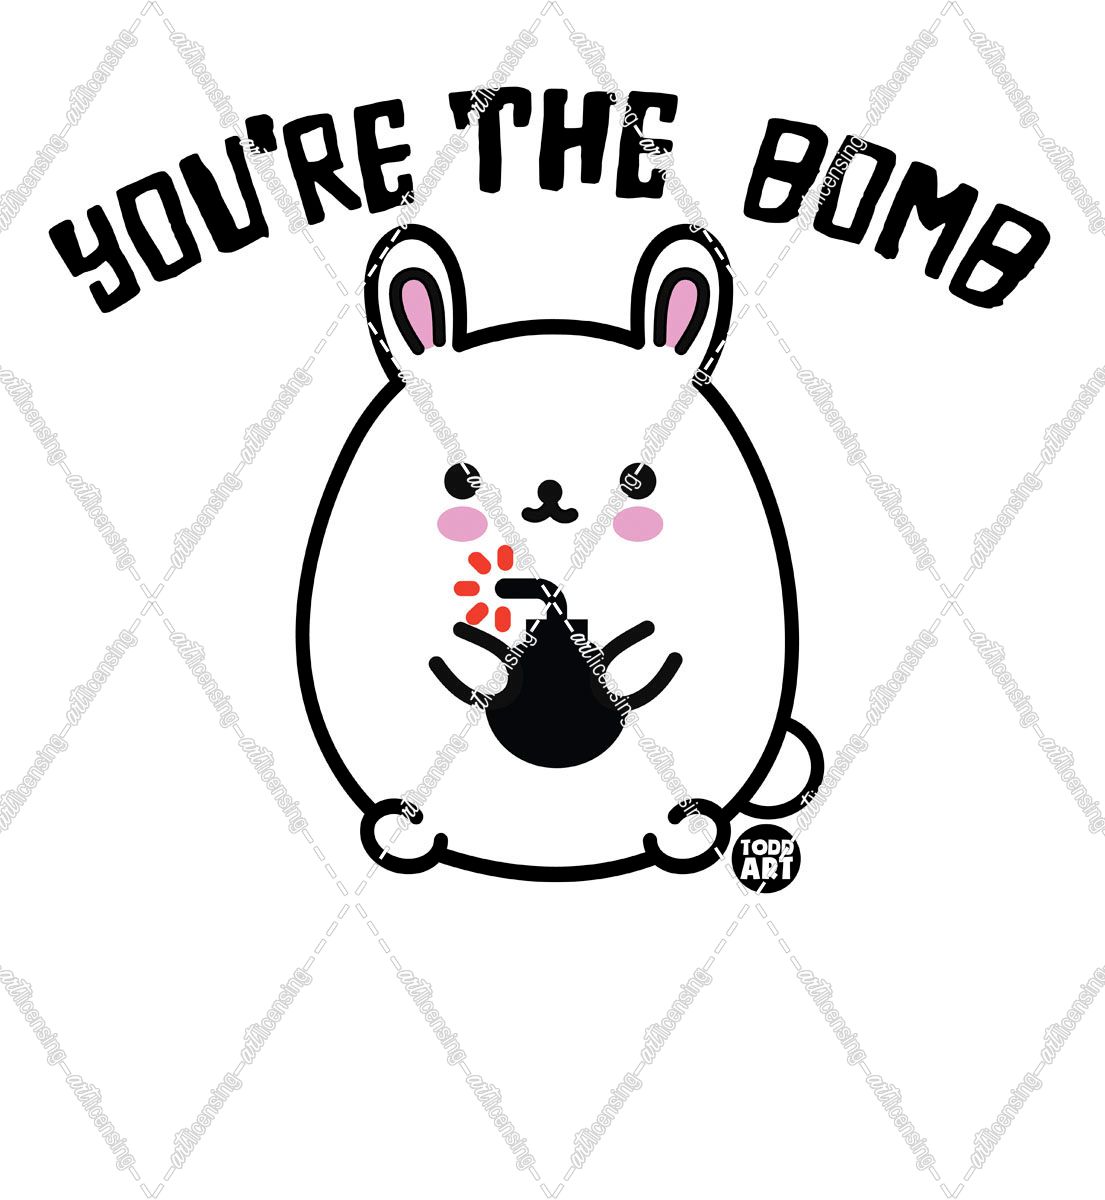 Bad Bunny – Youre The Bomb